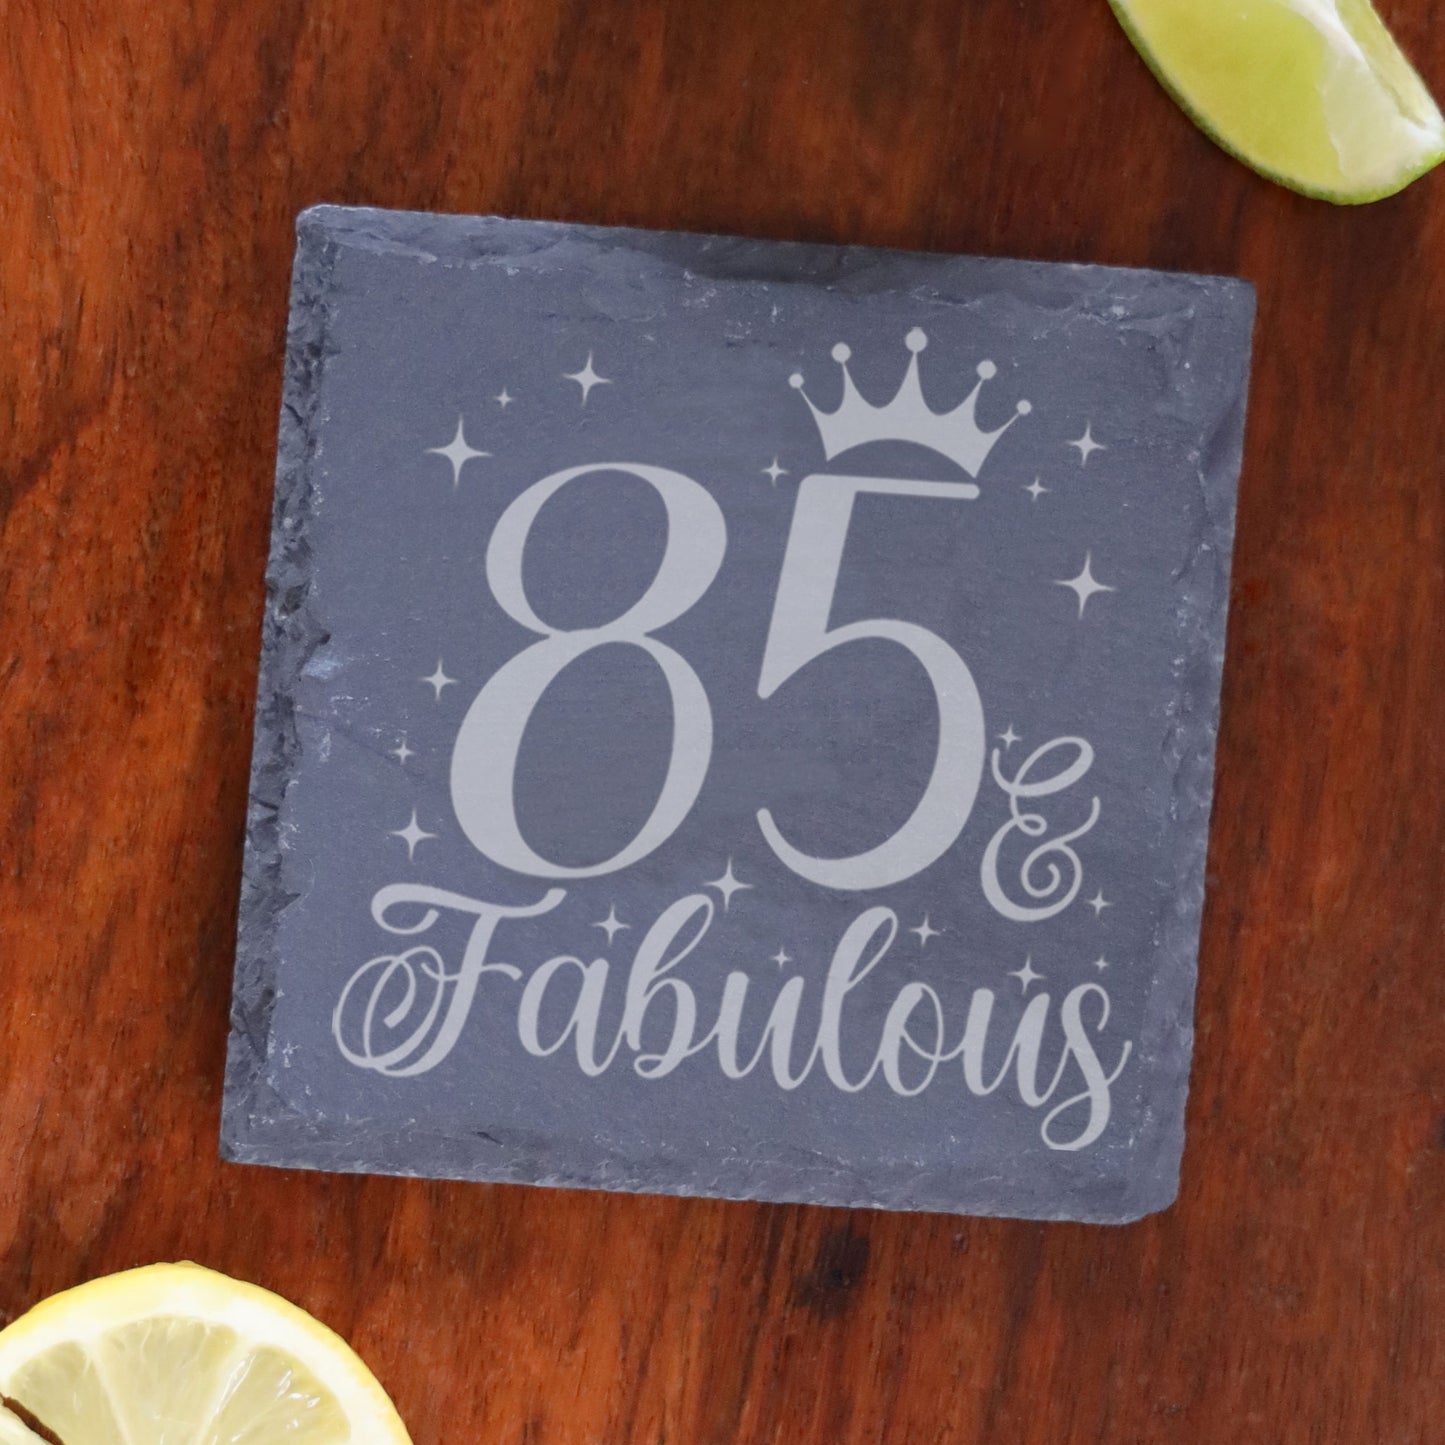 85 & Fabulous 85th Birthday Gift Engraved Wine Glass and/or Coaster Set  - Always Looking Good - Square Coaster Only  